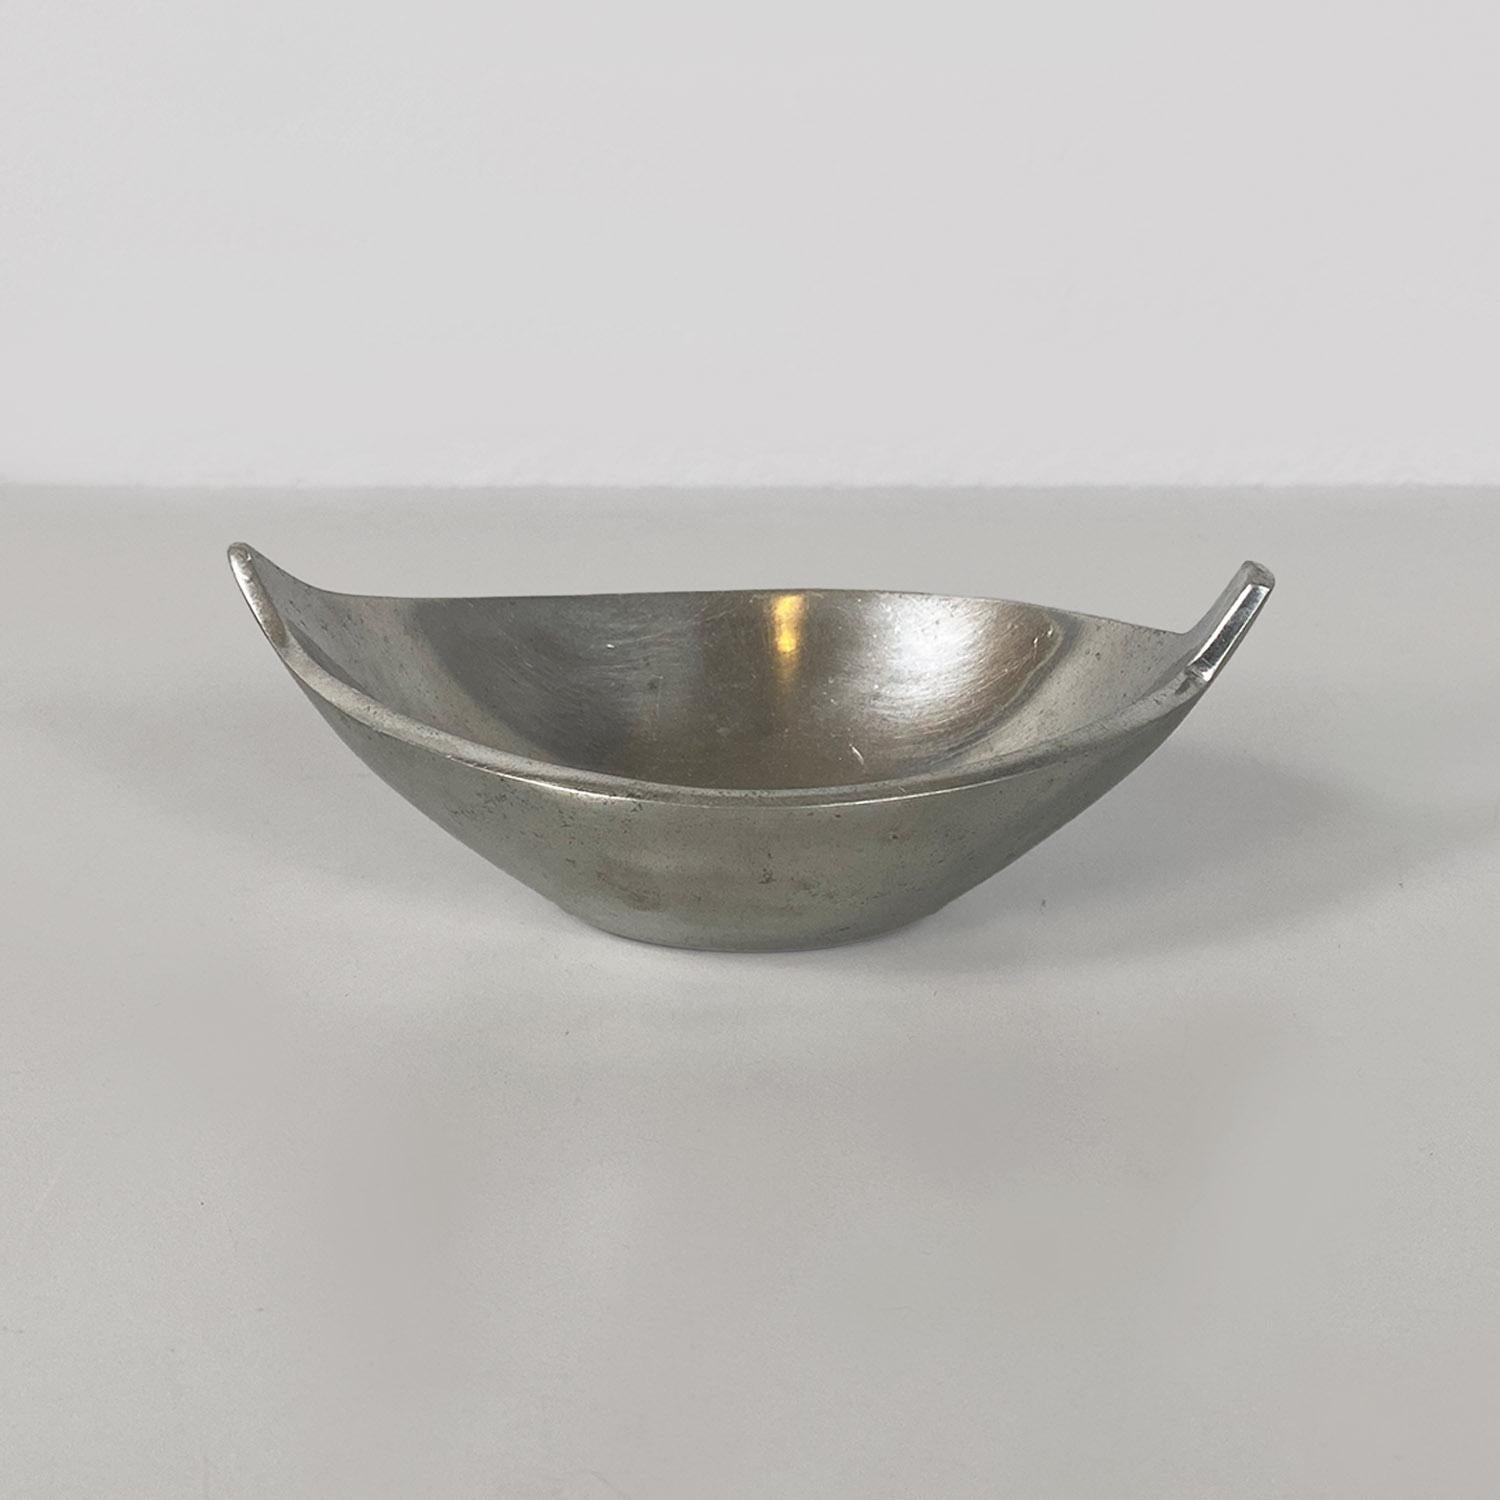 Italian modern metal irregular bowl or container cup by La Rinascente, 1990s.
Bowl or container cup, small in size, made of metal and with an irregular shape, with a pointed end and the opposite end with a square tab shape.
Produced by La Rinascente